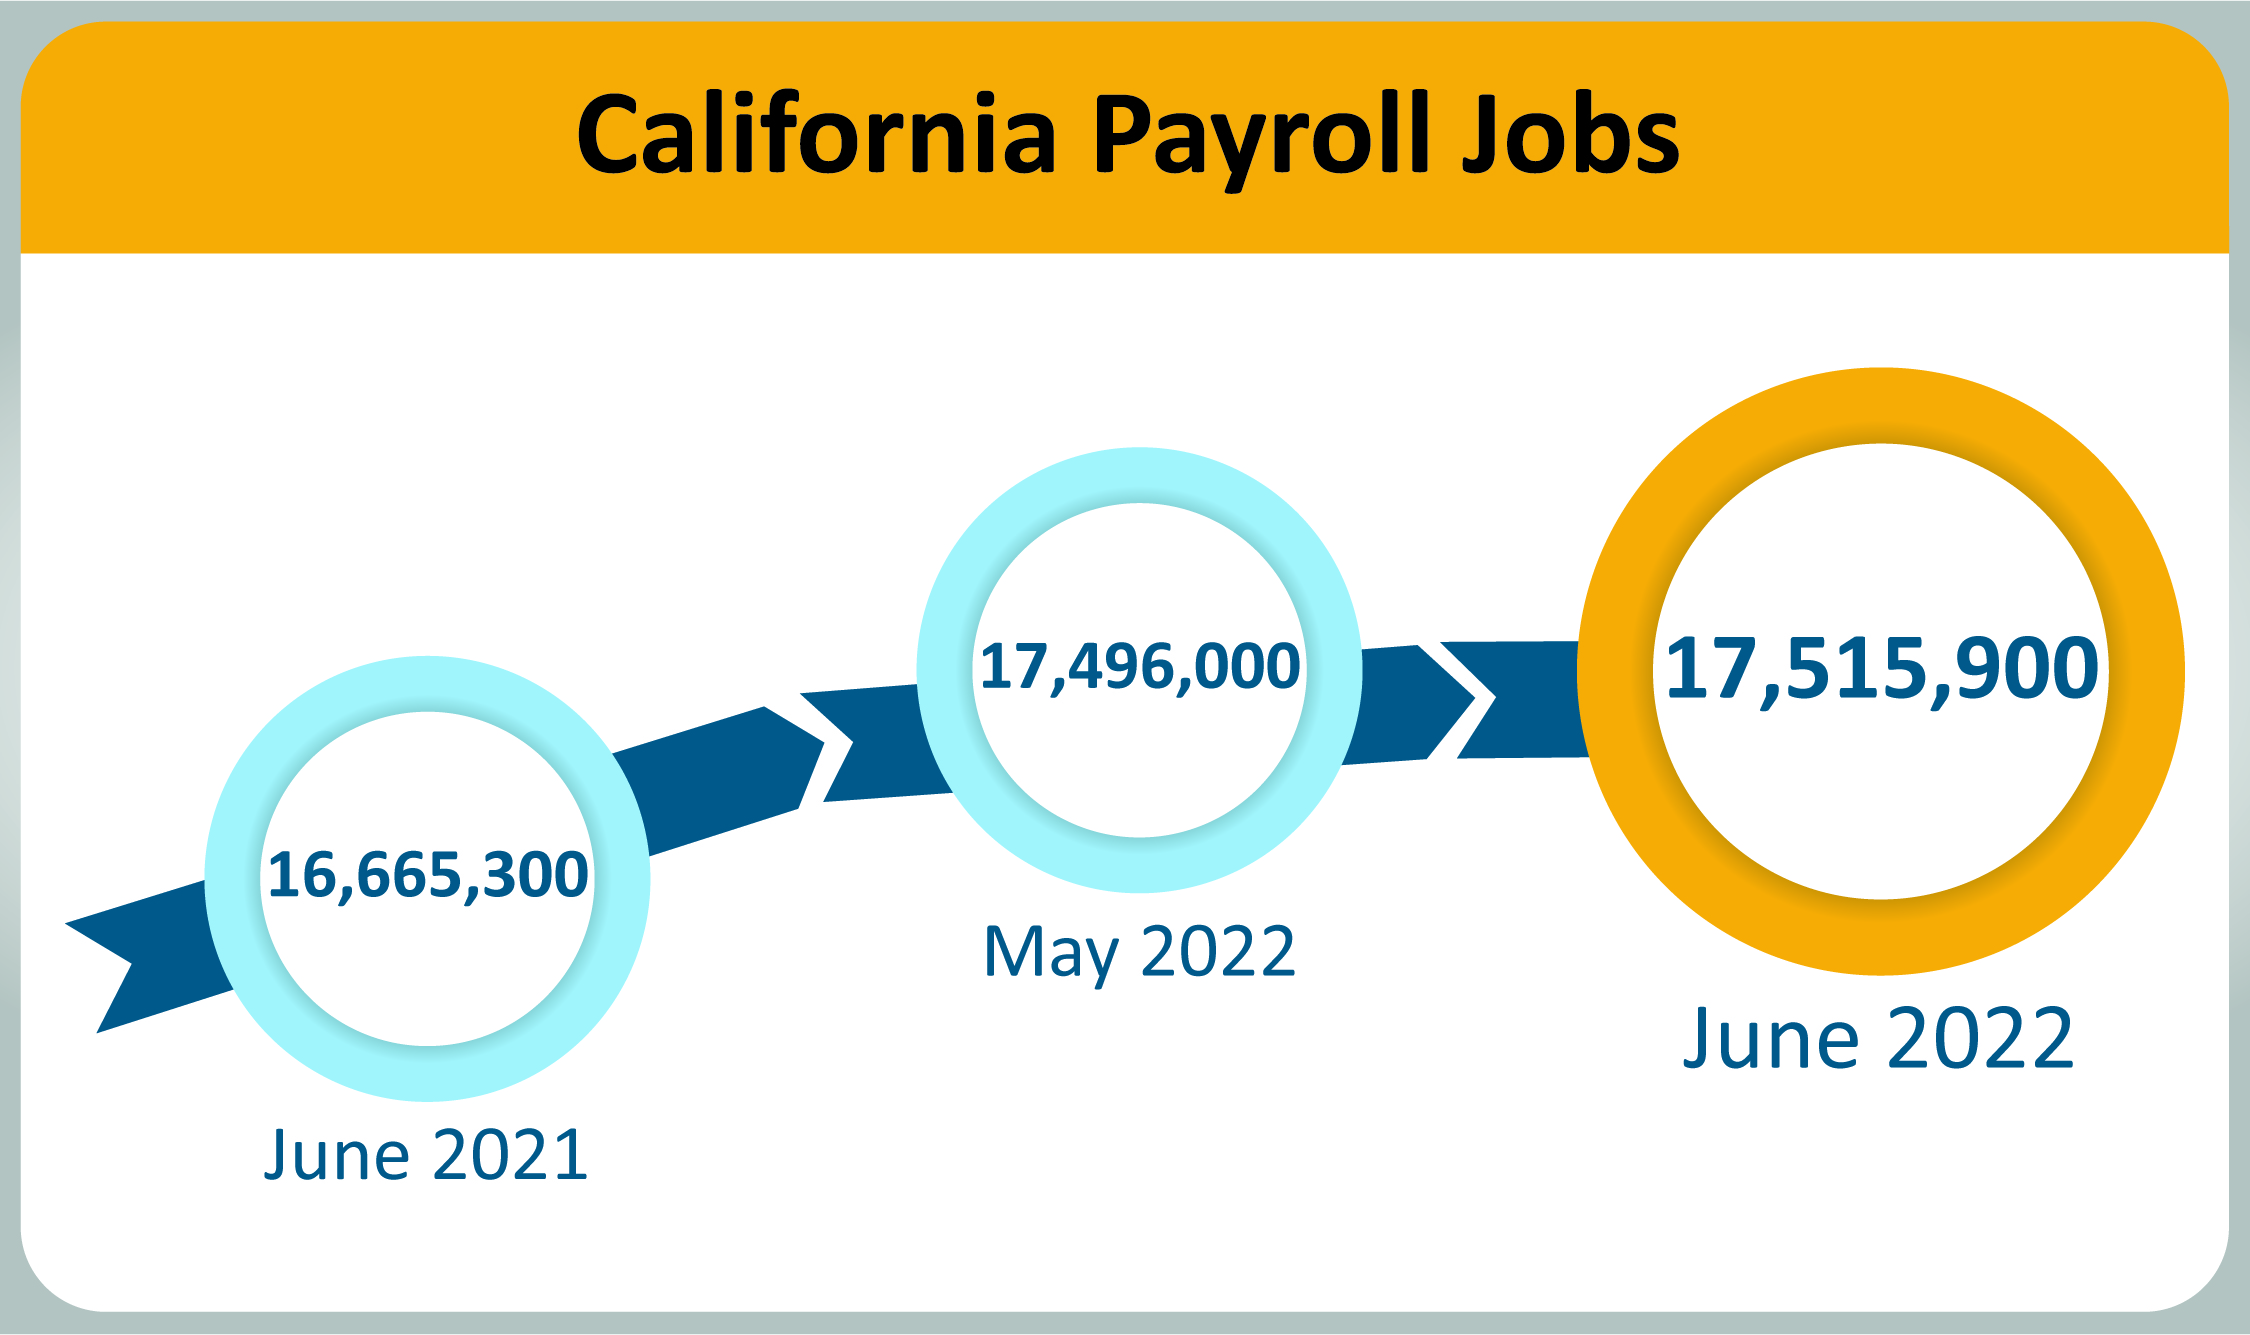 California payroll jobs totaled 17,515,900 in June 2022, up from 16,665,300 in June 2021.